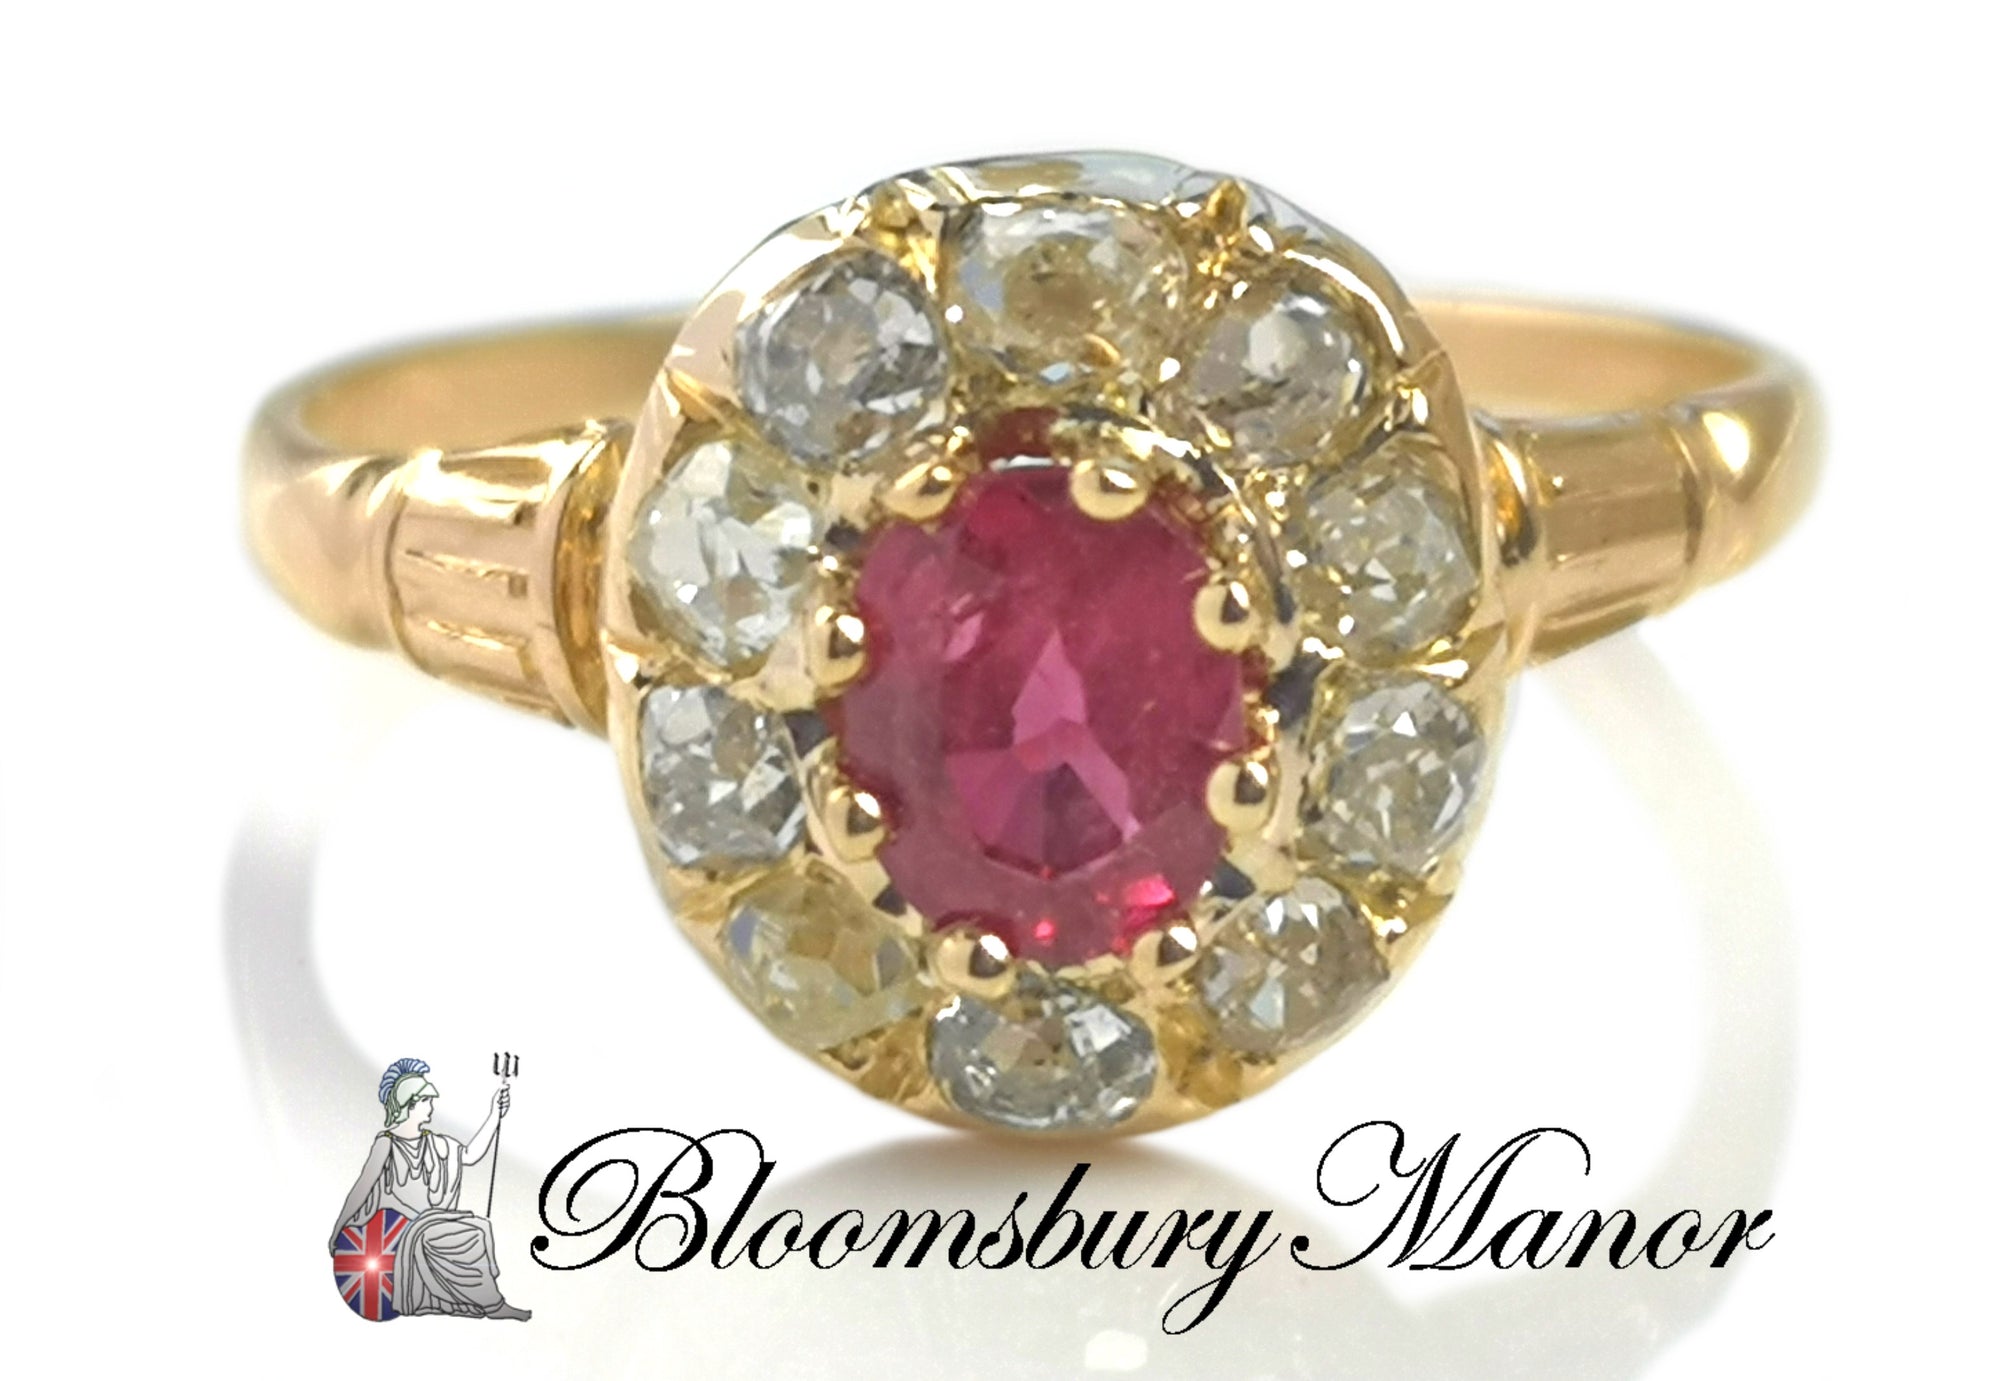 Antique Victorian French 0.55ct Ruby & Diamond Cluster Ring in 18k Yellow Gold